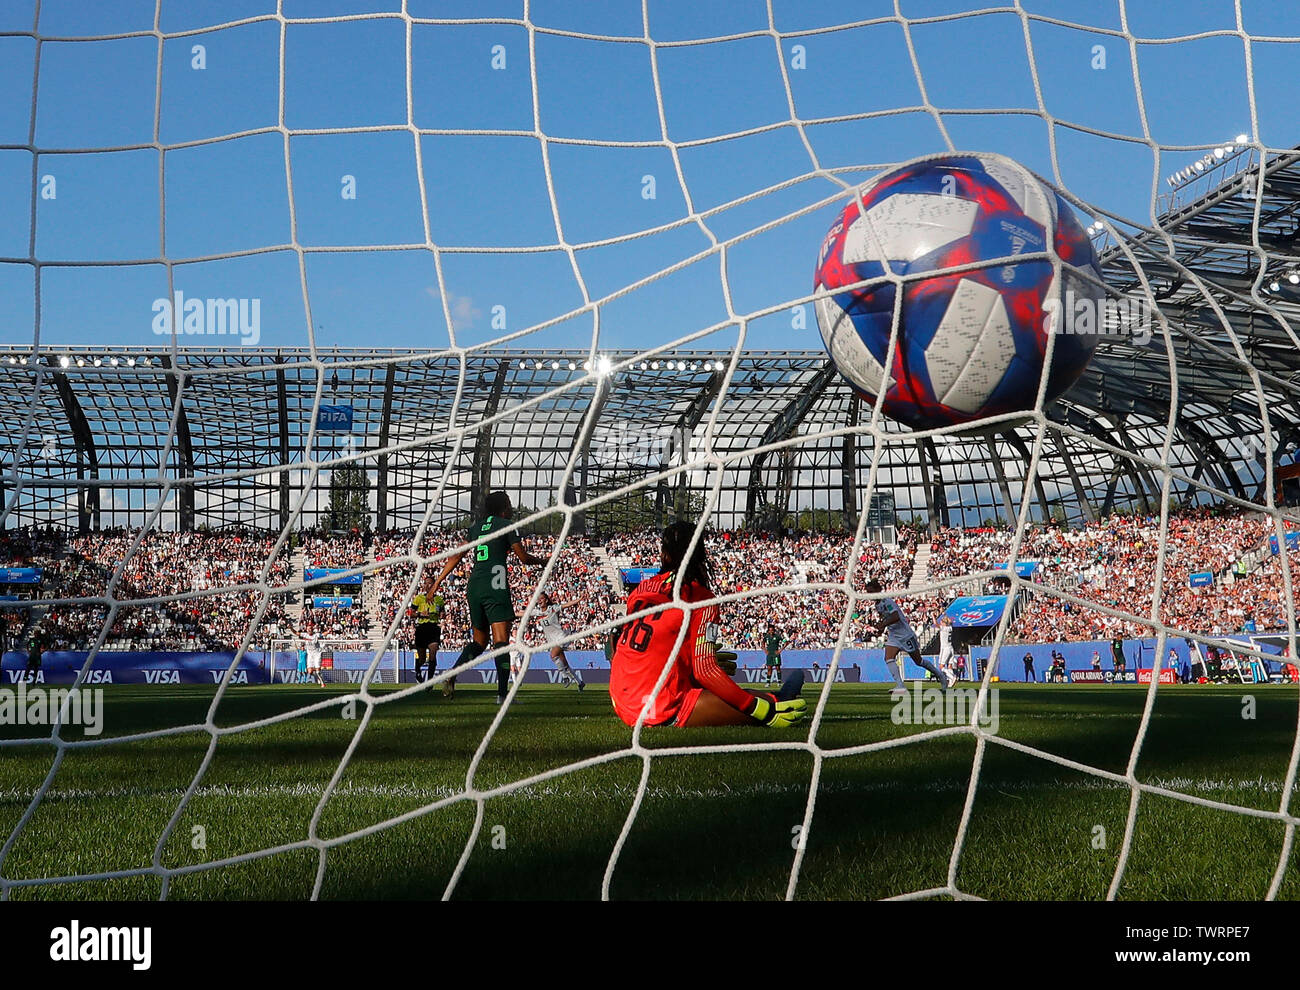 Grenoble, France. 22nd June, 2019. Goalkeeper Chiamaka Nnadozie of Nigeria fails to save a goal by Lea Schueller of Germany during the round of 16 match at the 2019 FIFA Women's World Cup at Stade des Alpes in Grenoble, France, June 22, 2019. Credit: Ding Xu/Xinhua/Alamy Live News Stock Photo